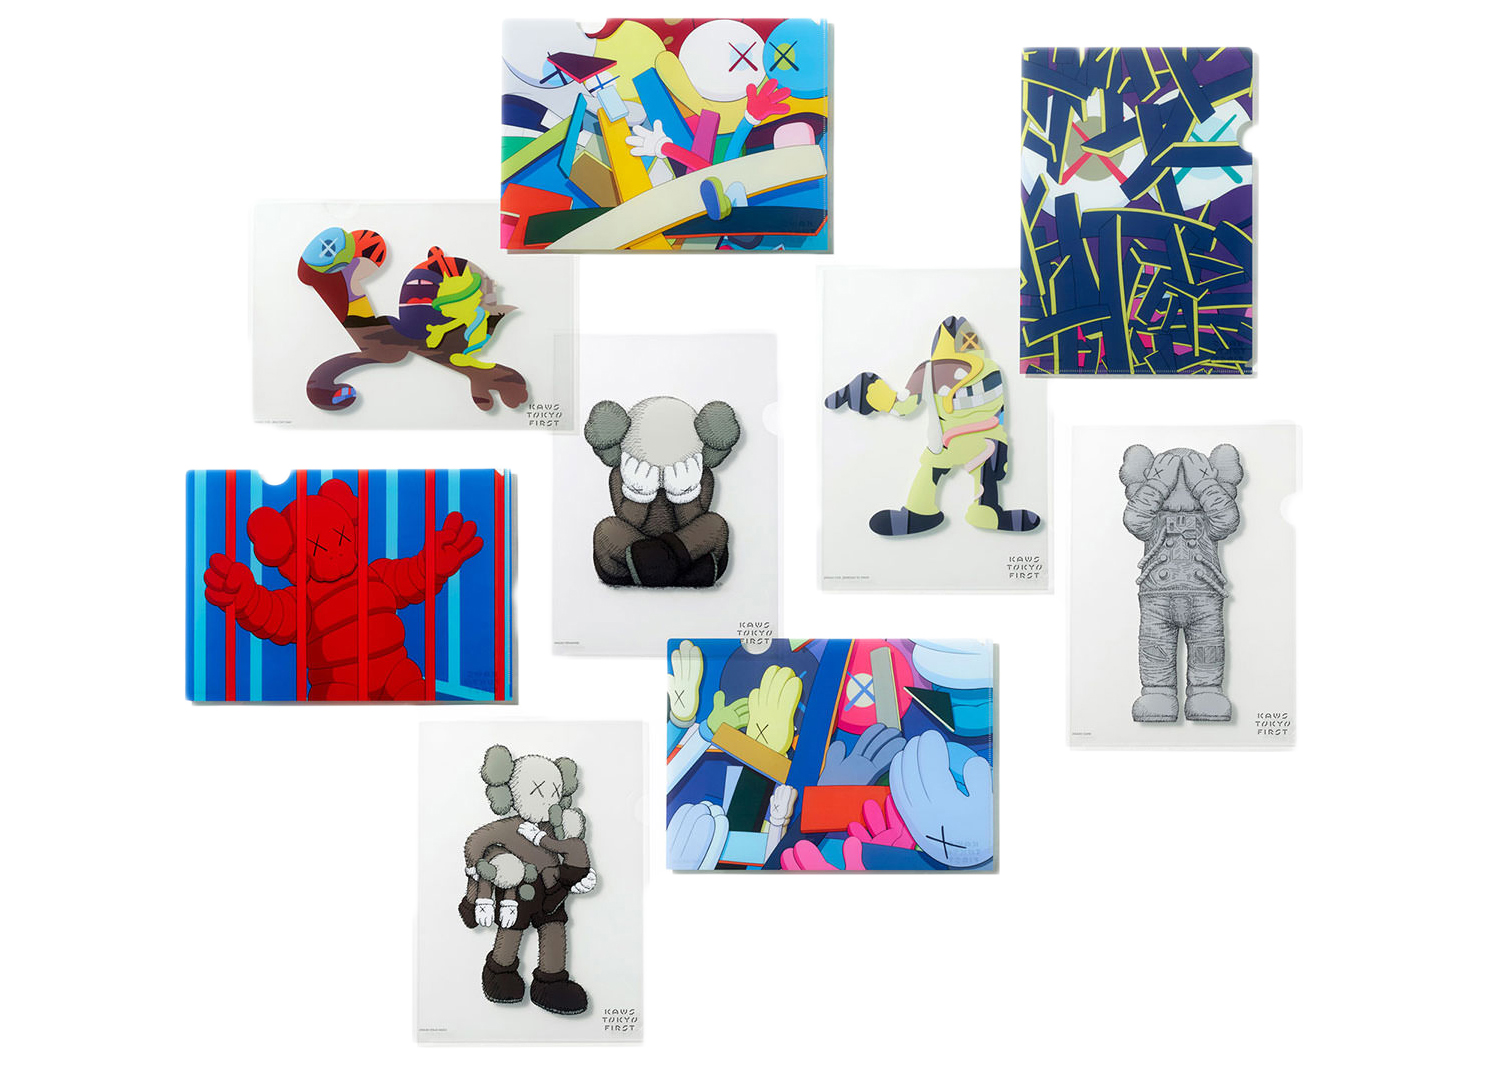 KAWS Other - Buy & Sell Collectibles.